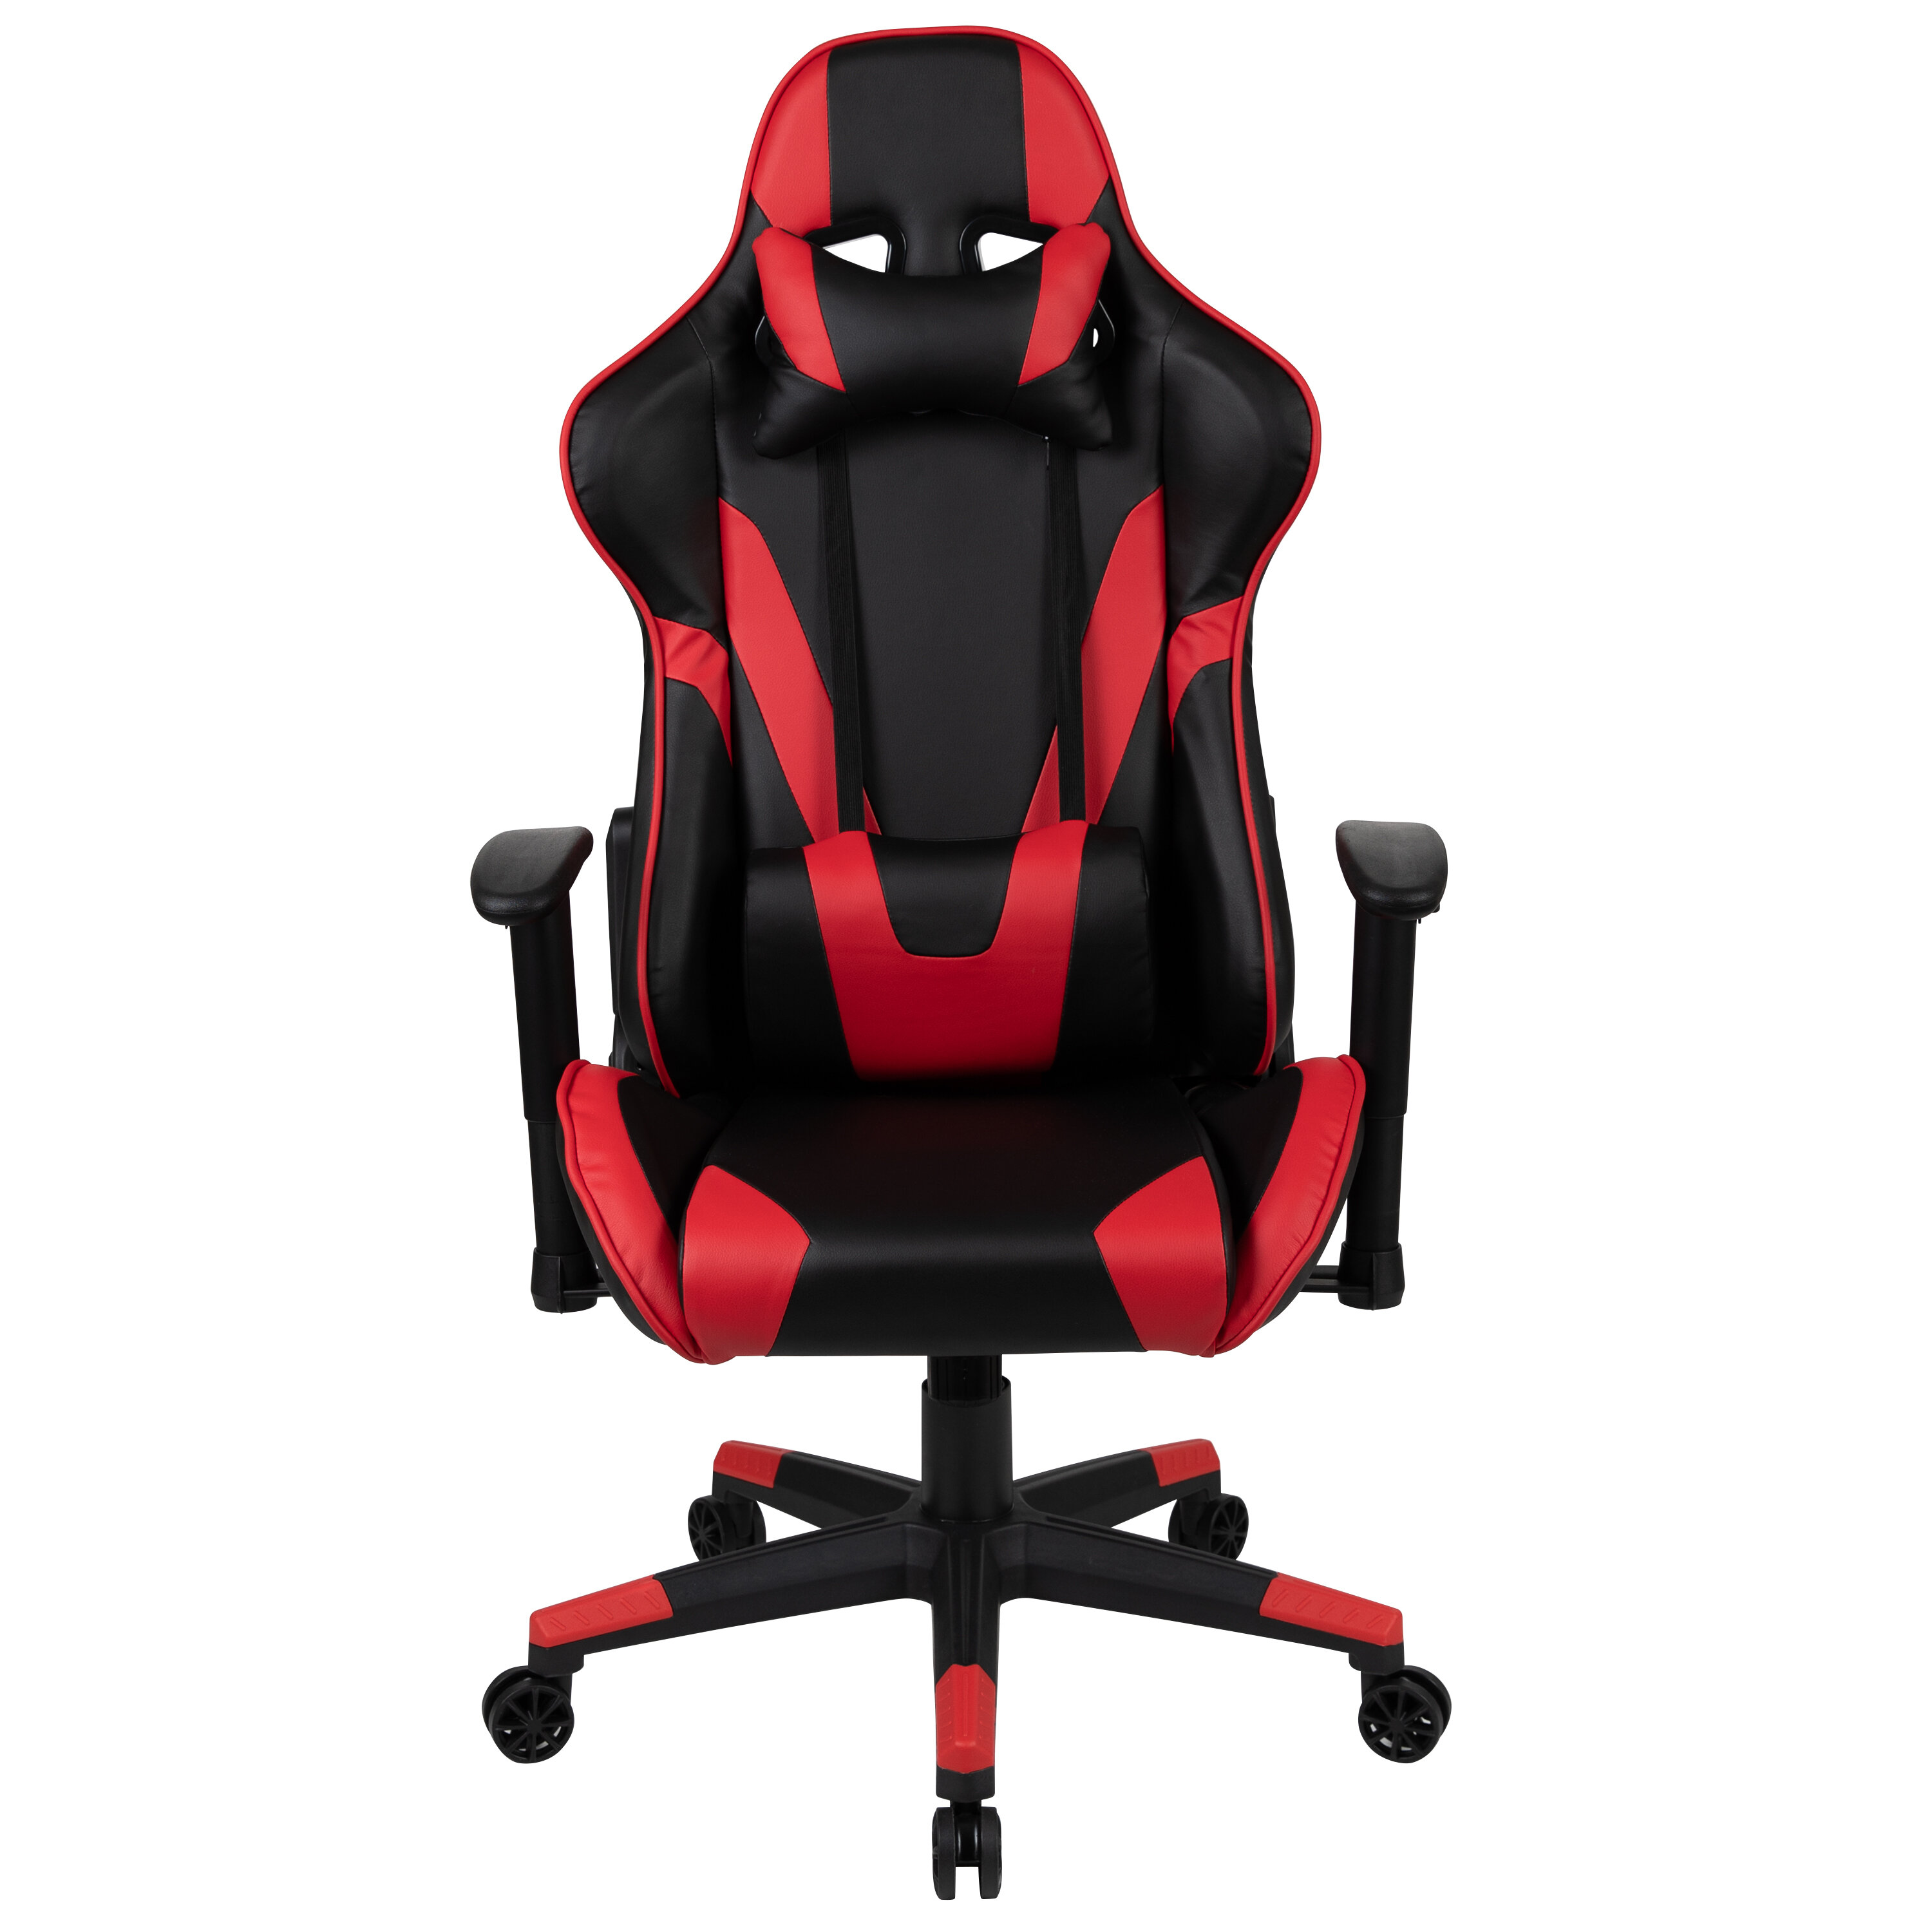 Red Gaming Chair Big and Tall Office Chair 400lbs Wide Seat Ergonomic Desk Chair Task High Back Rolling Swivel Adjustable Racing Computer Chair with Lumbar Support Armrest Headrest for Heavy People 